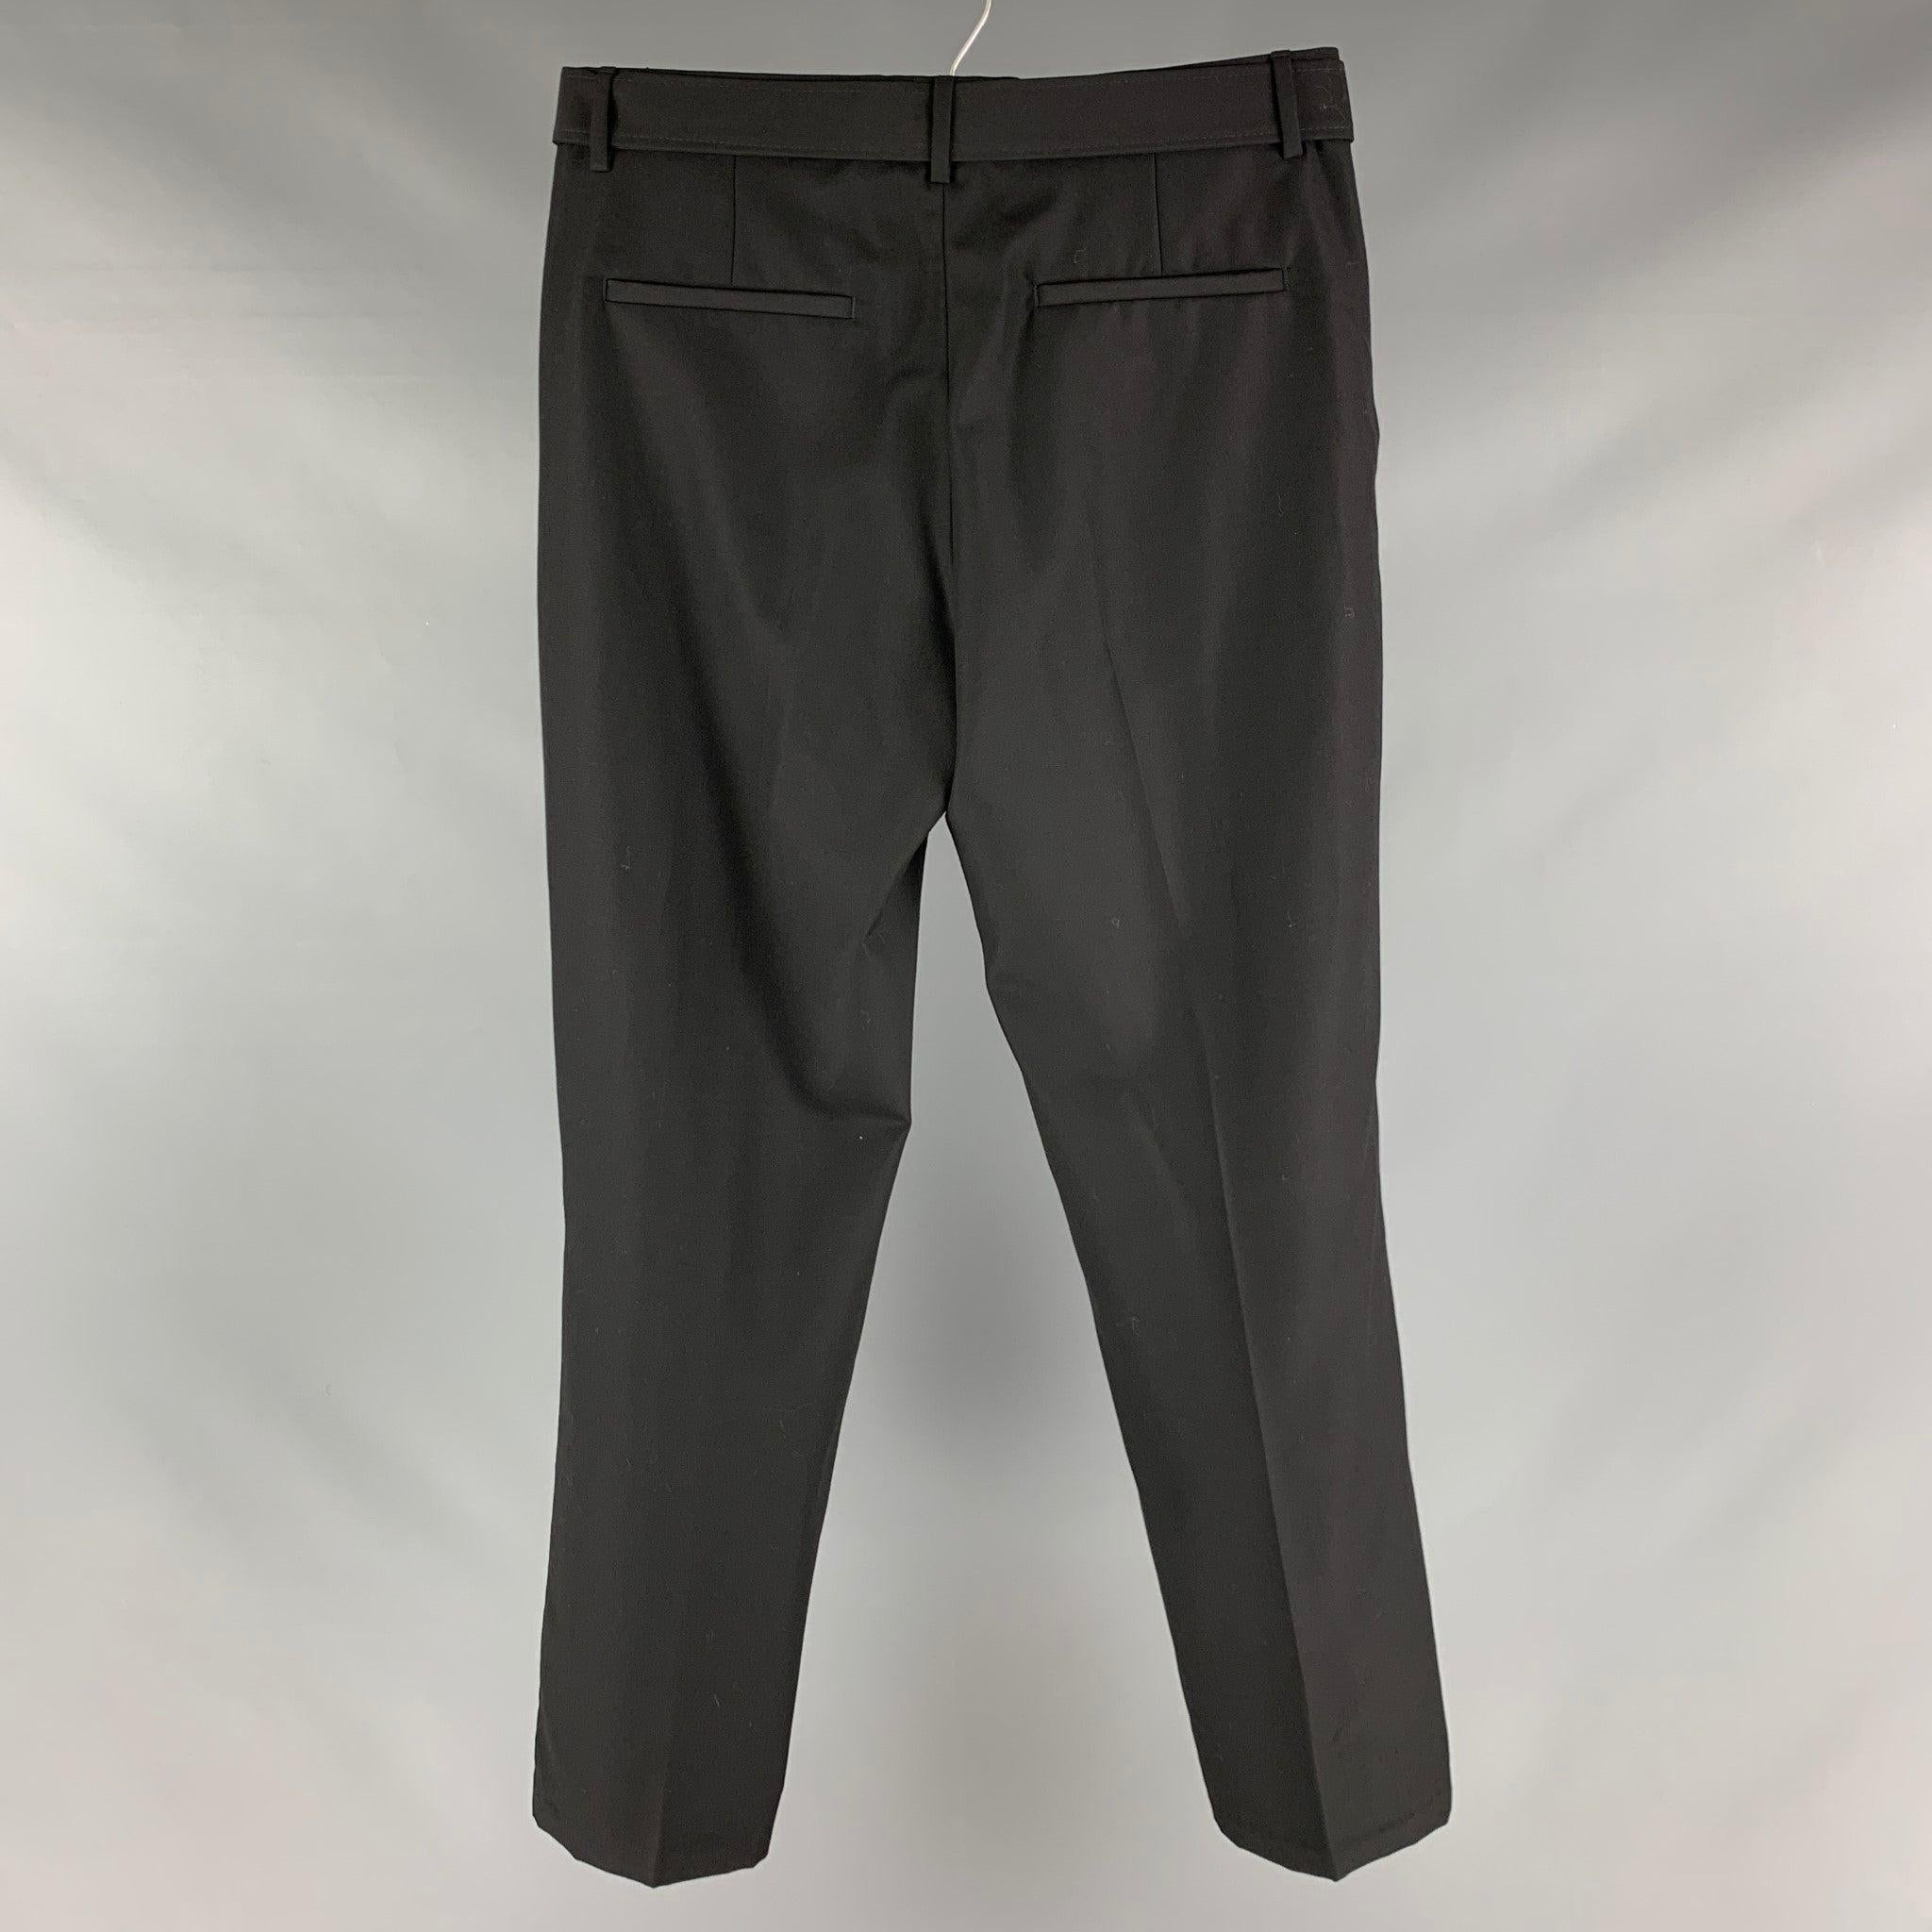 THE KOOPLES dress pants comes in a black wool woven material featuring a flat front style, and belted waist band.Excellent Pre-Owned Condition. 

Marked:  48 

Measurements: 
 Waist: 32 inches Rise: 10.5 inches Inseam: 29 inches 
 
 
Reference: